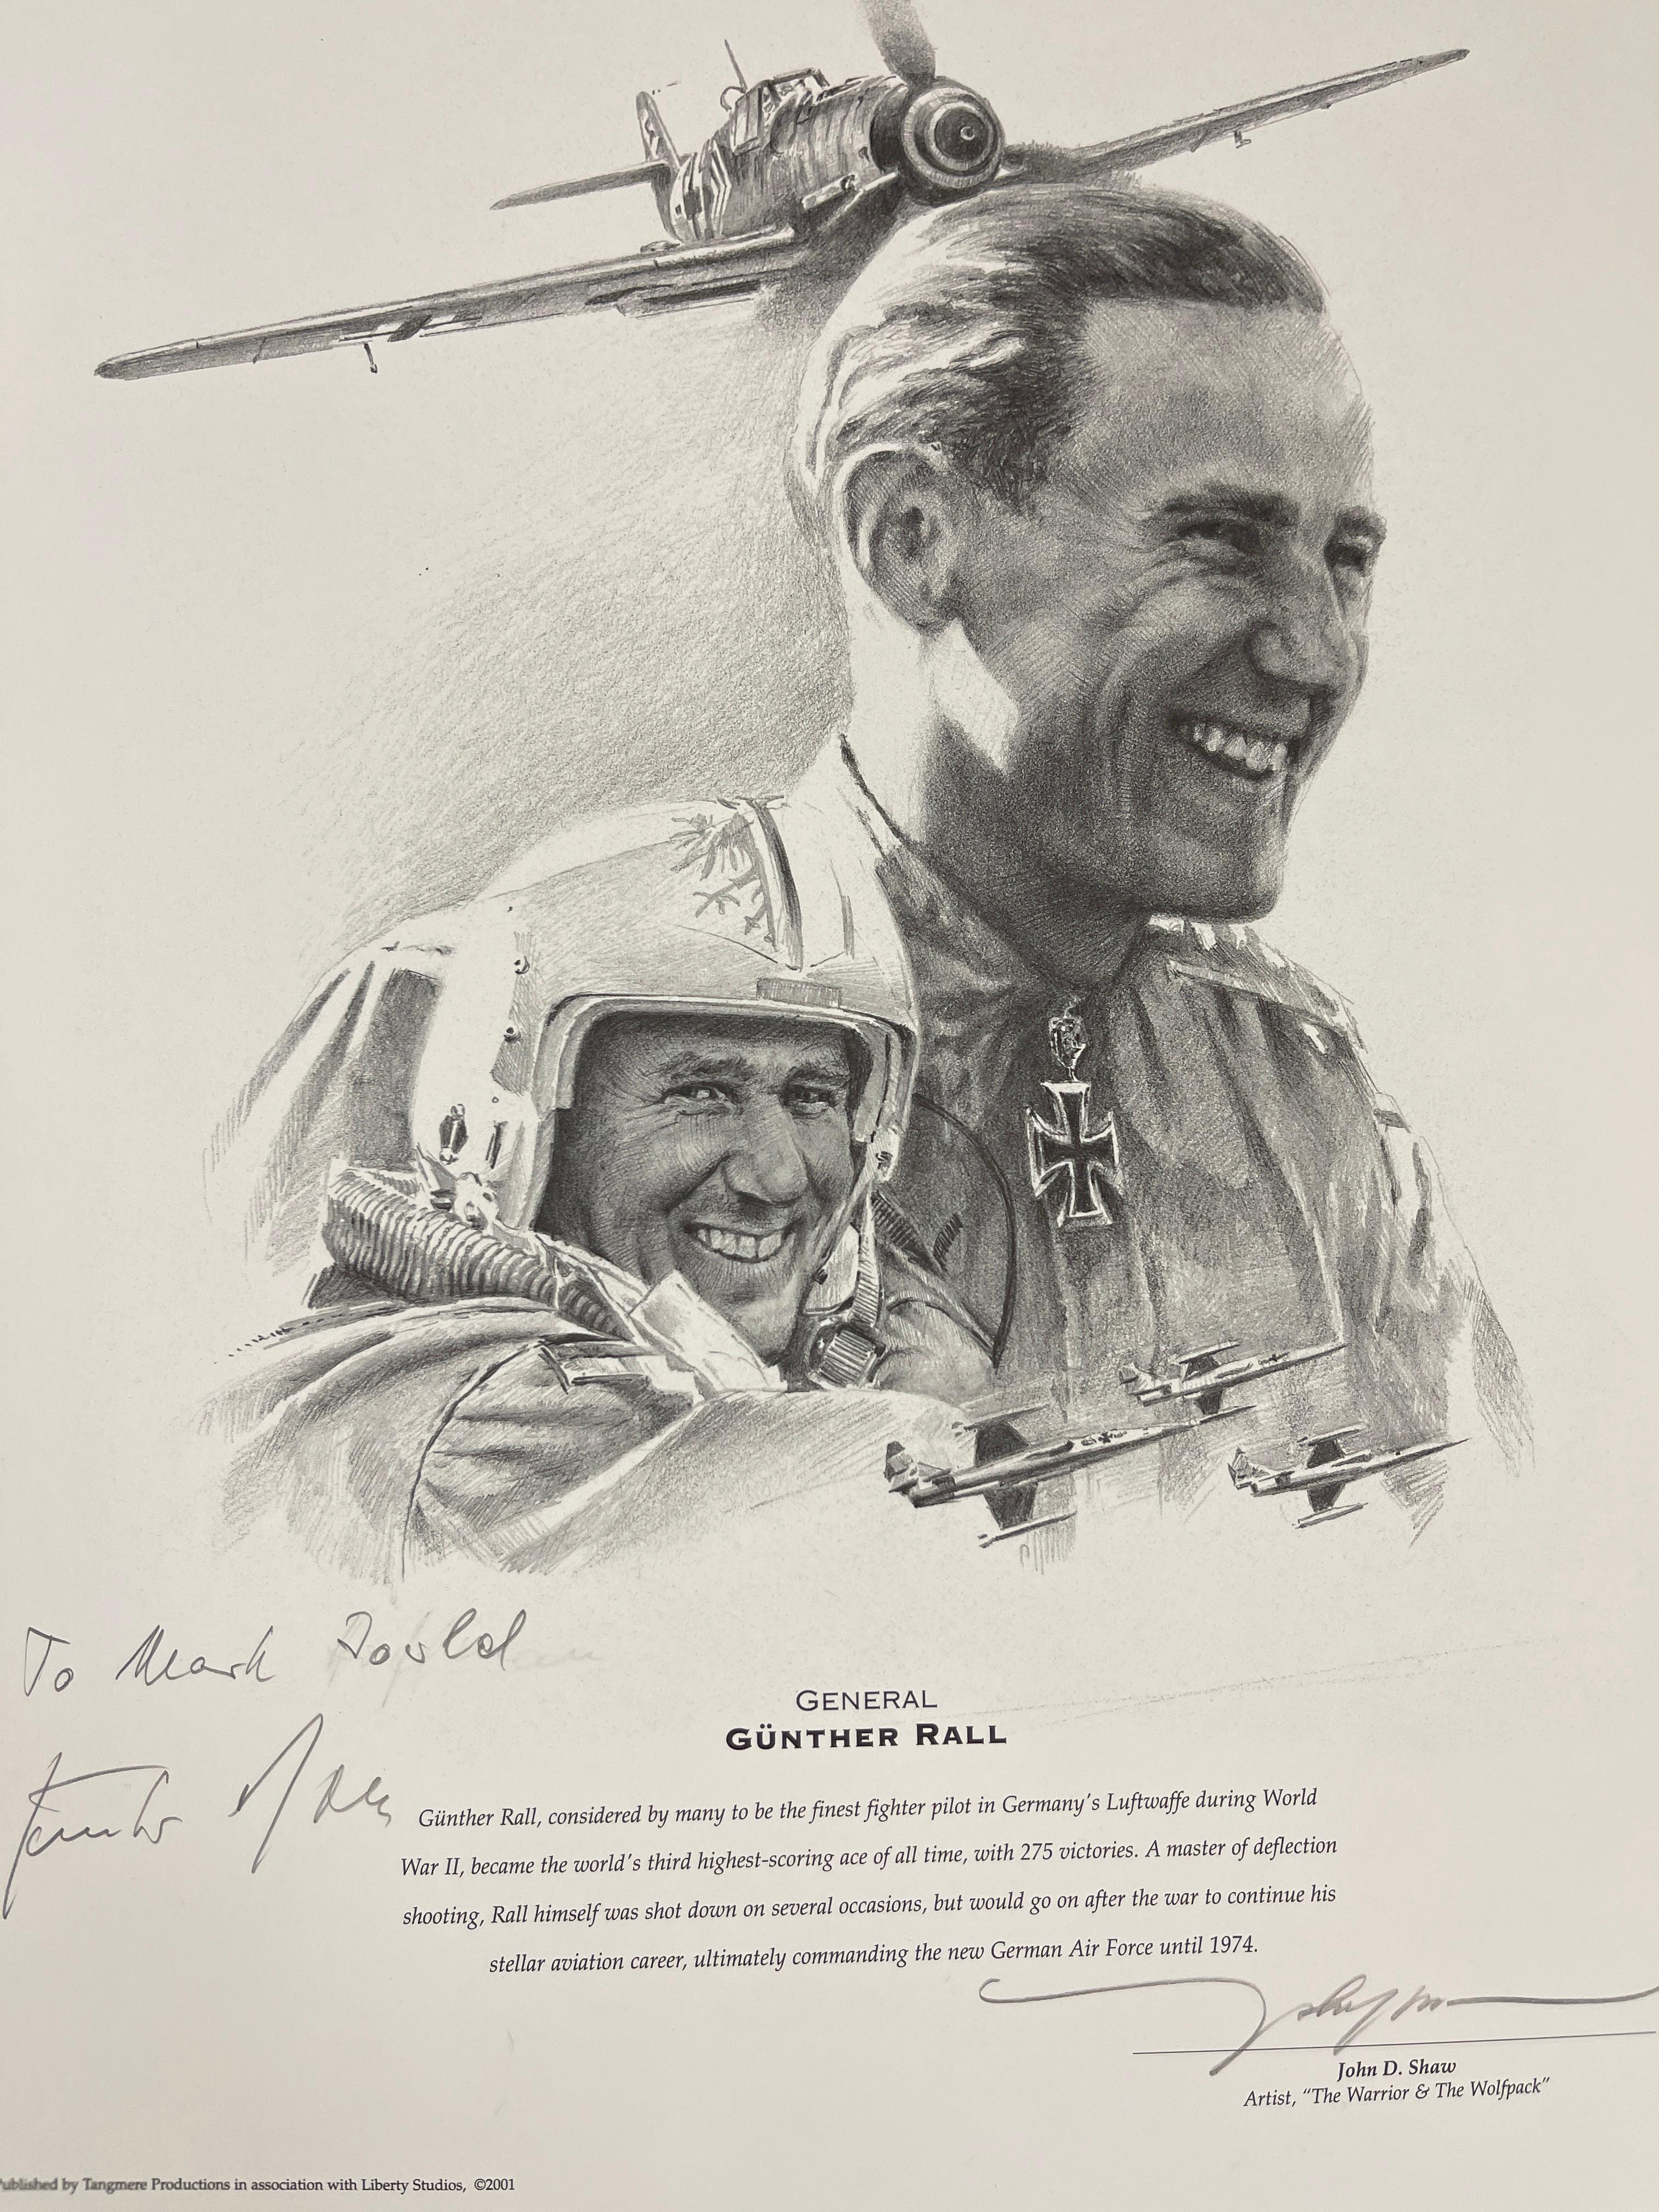 General Gunther Rall German Luftwaffe Fighter Pilot Signed Lithograph by John D. Shaw